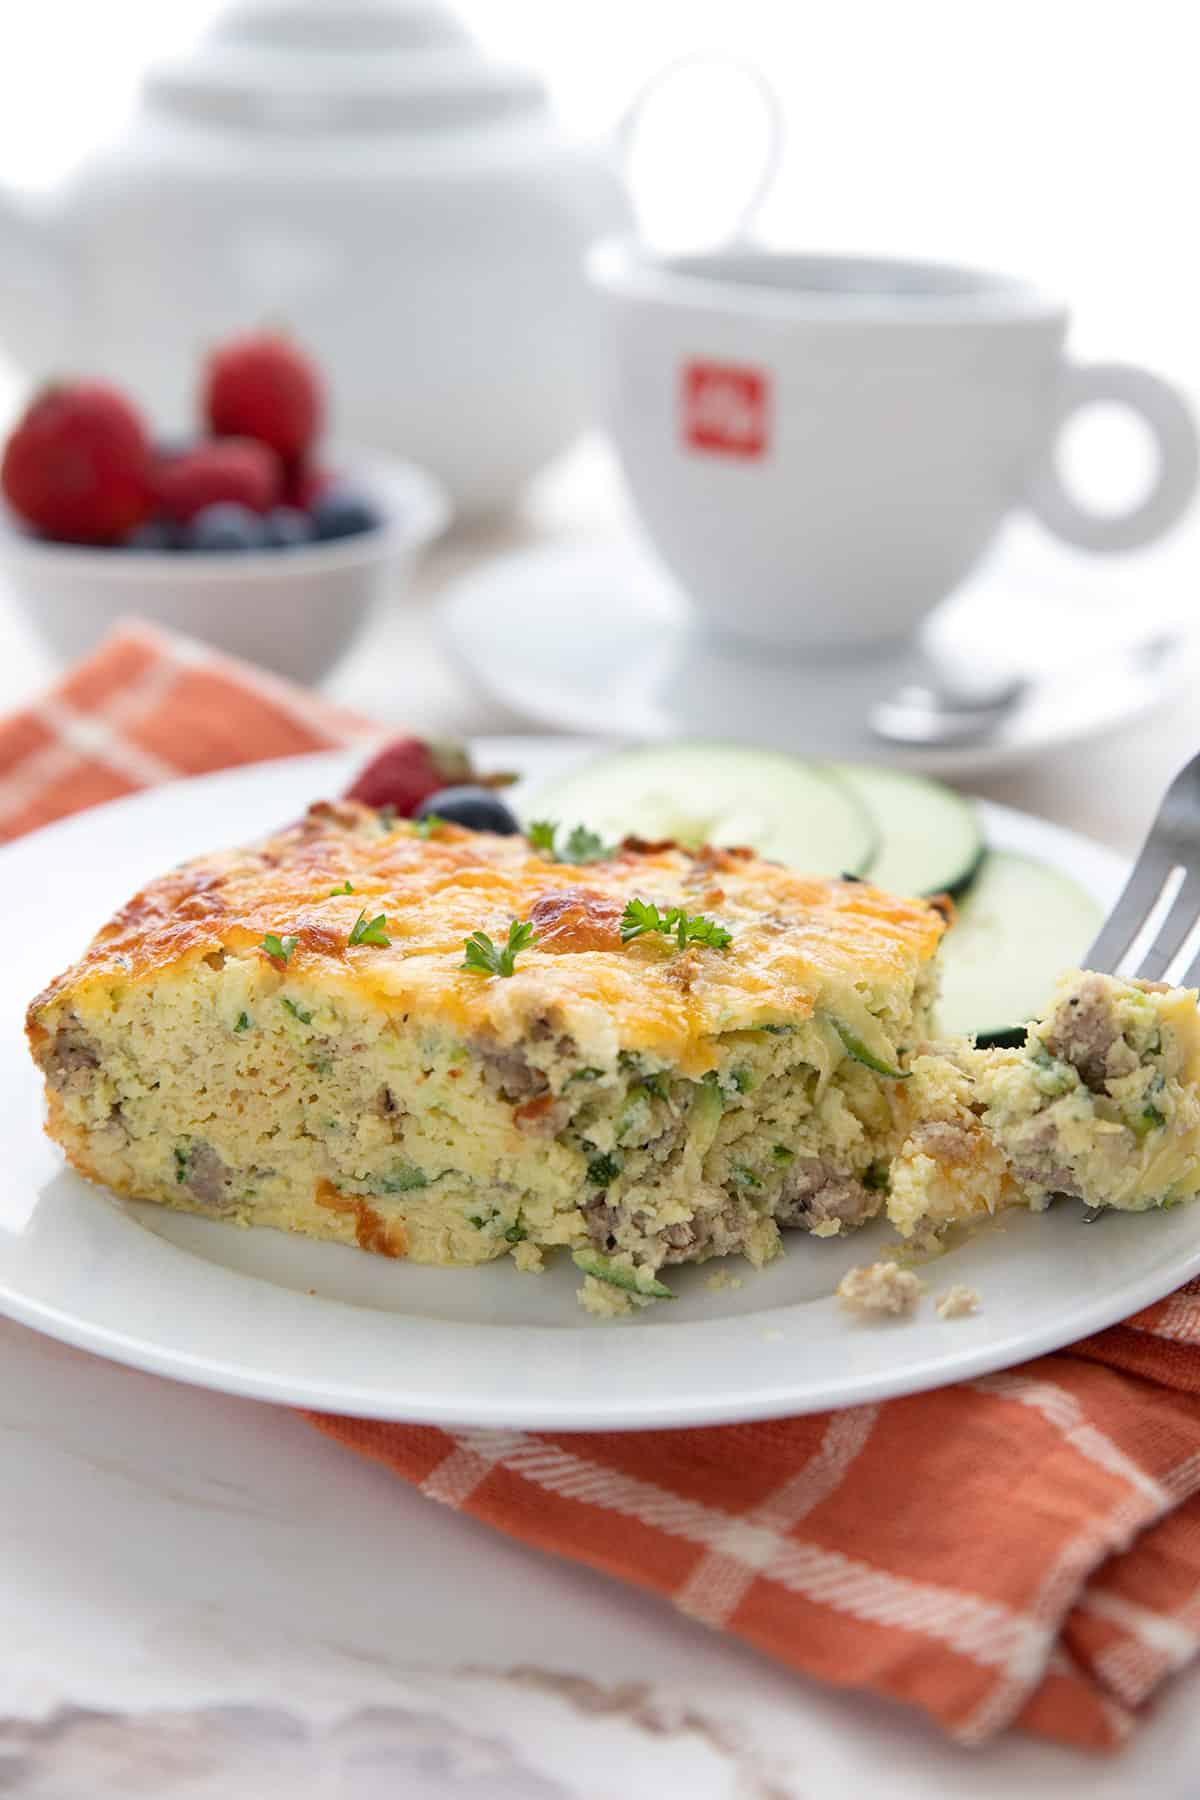 A slice of zucchini sausage breakfast casserole on a white plate with a forkful taken out of it.